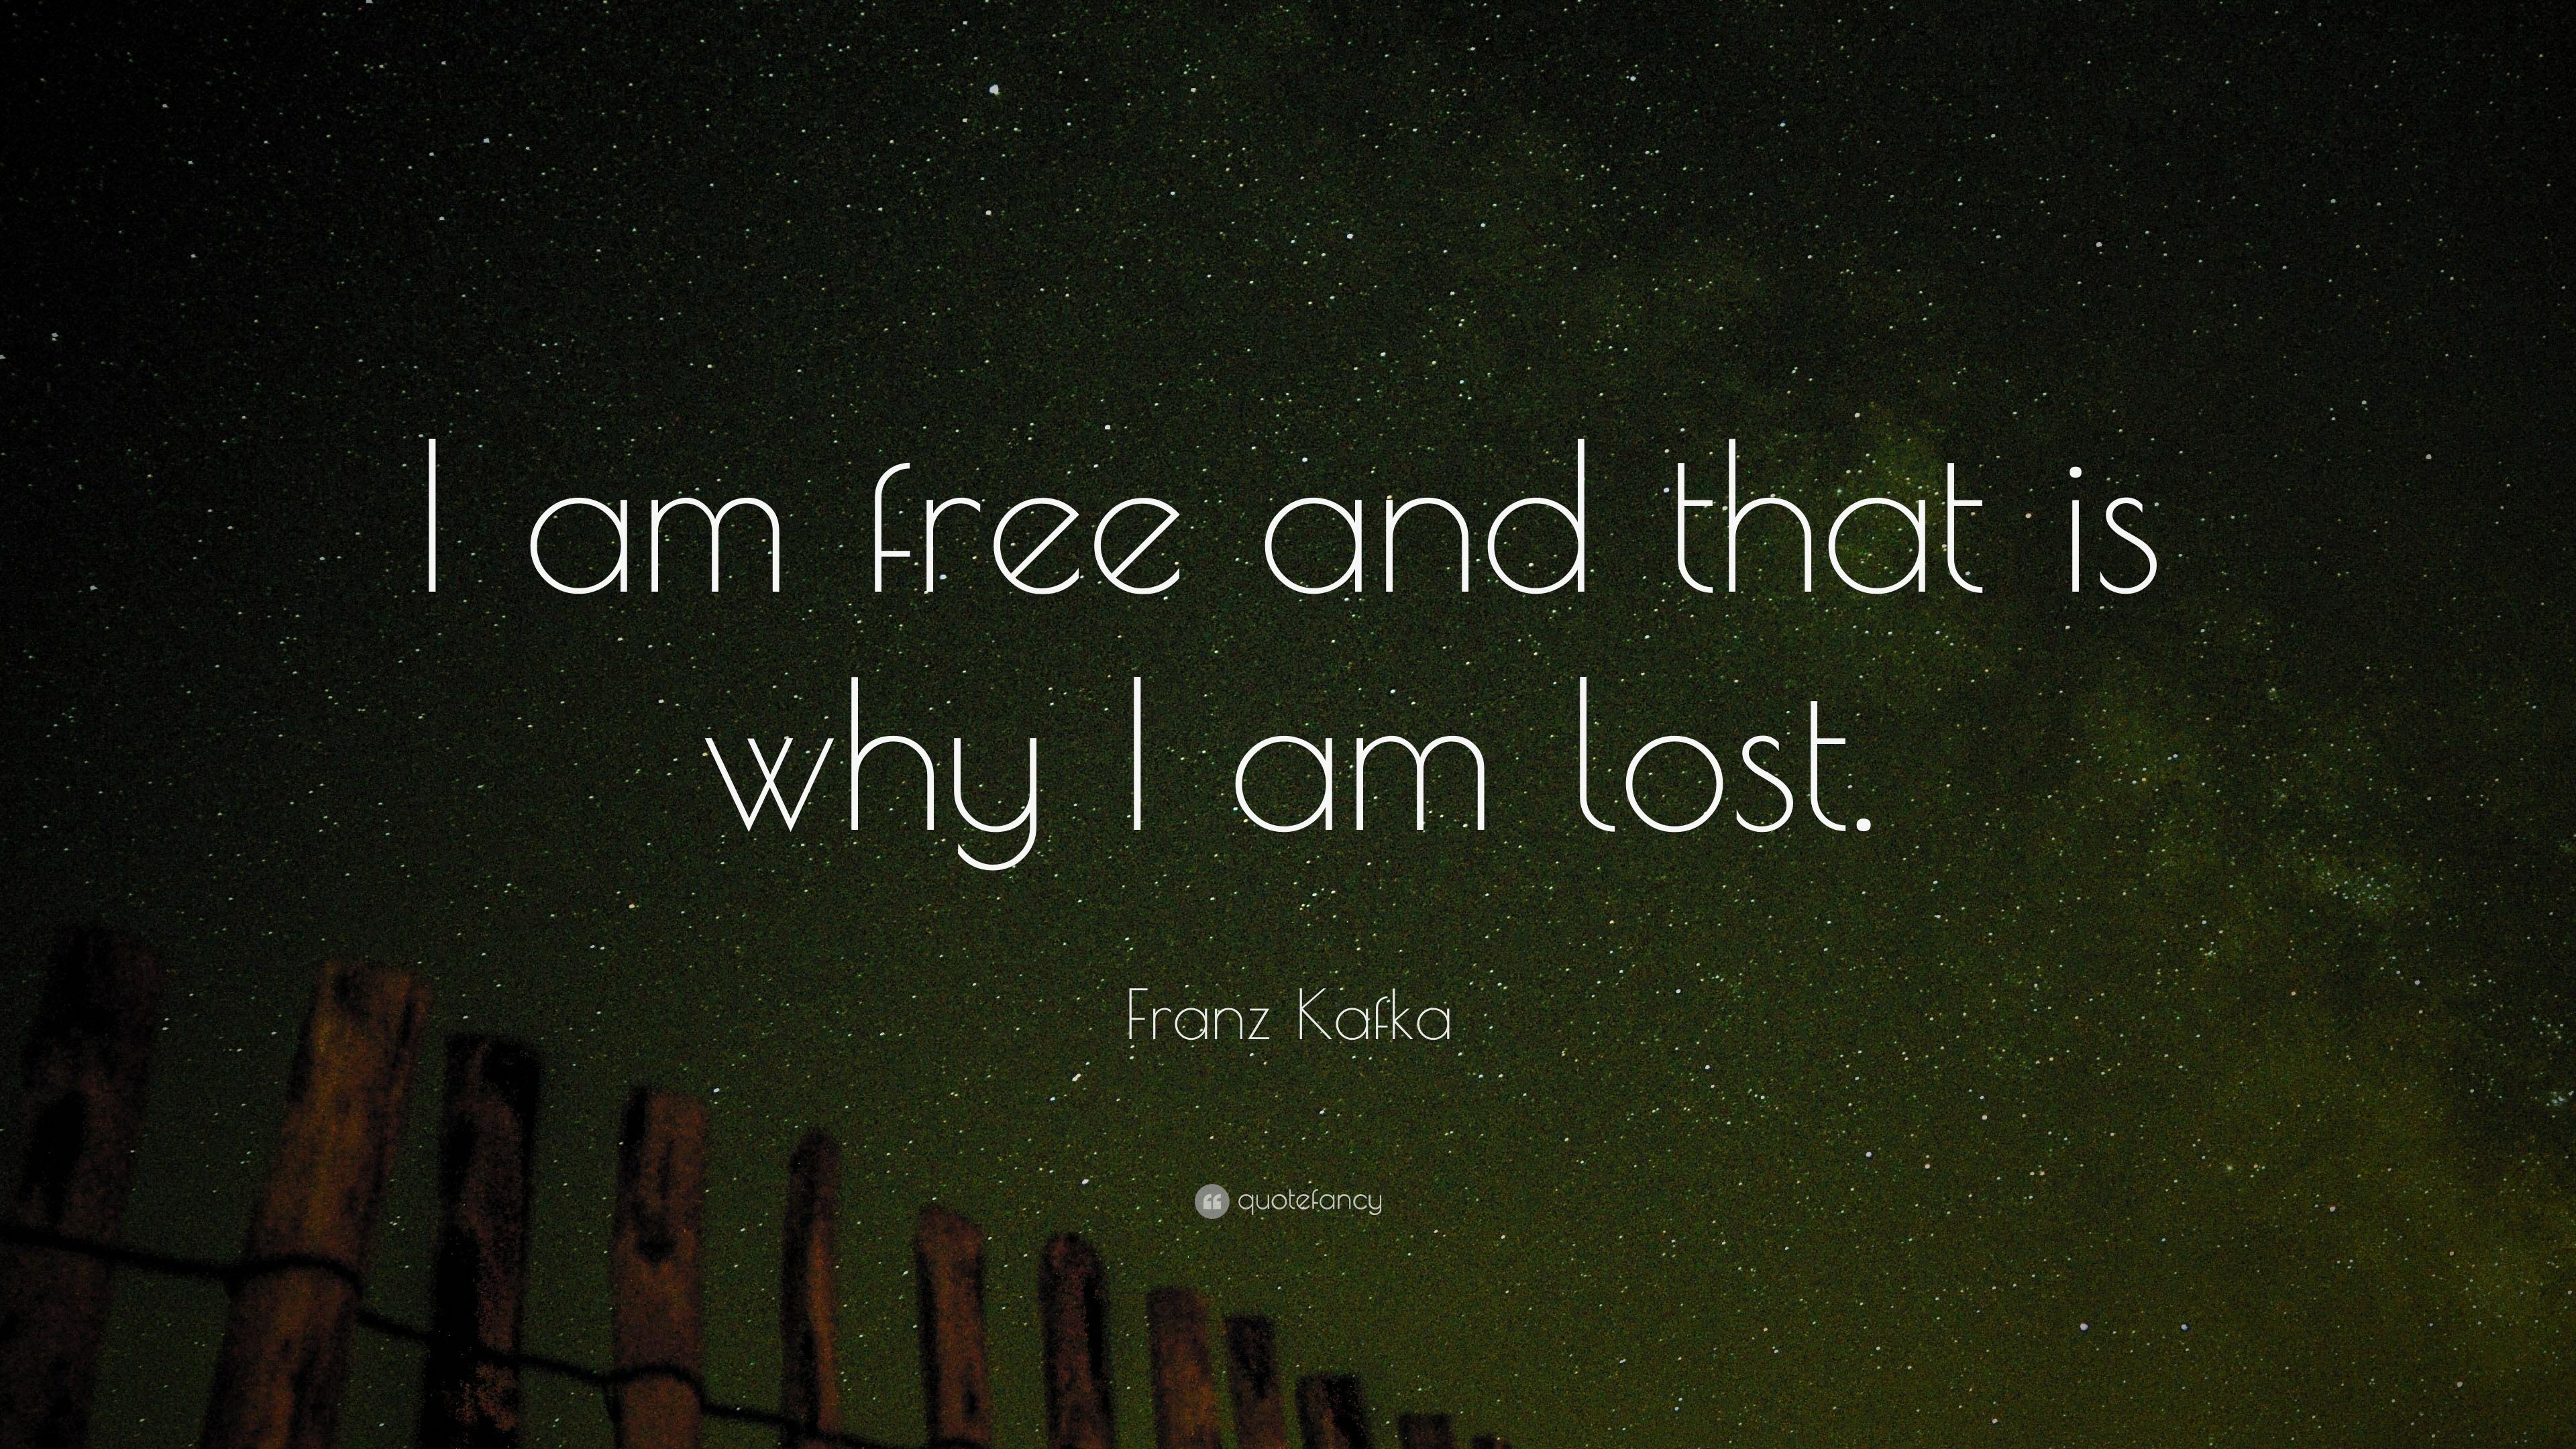 Franz Kafka Quote: “I am free and that is why I am lost.” 25